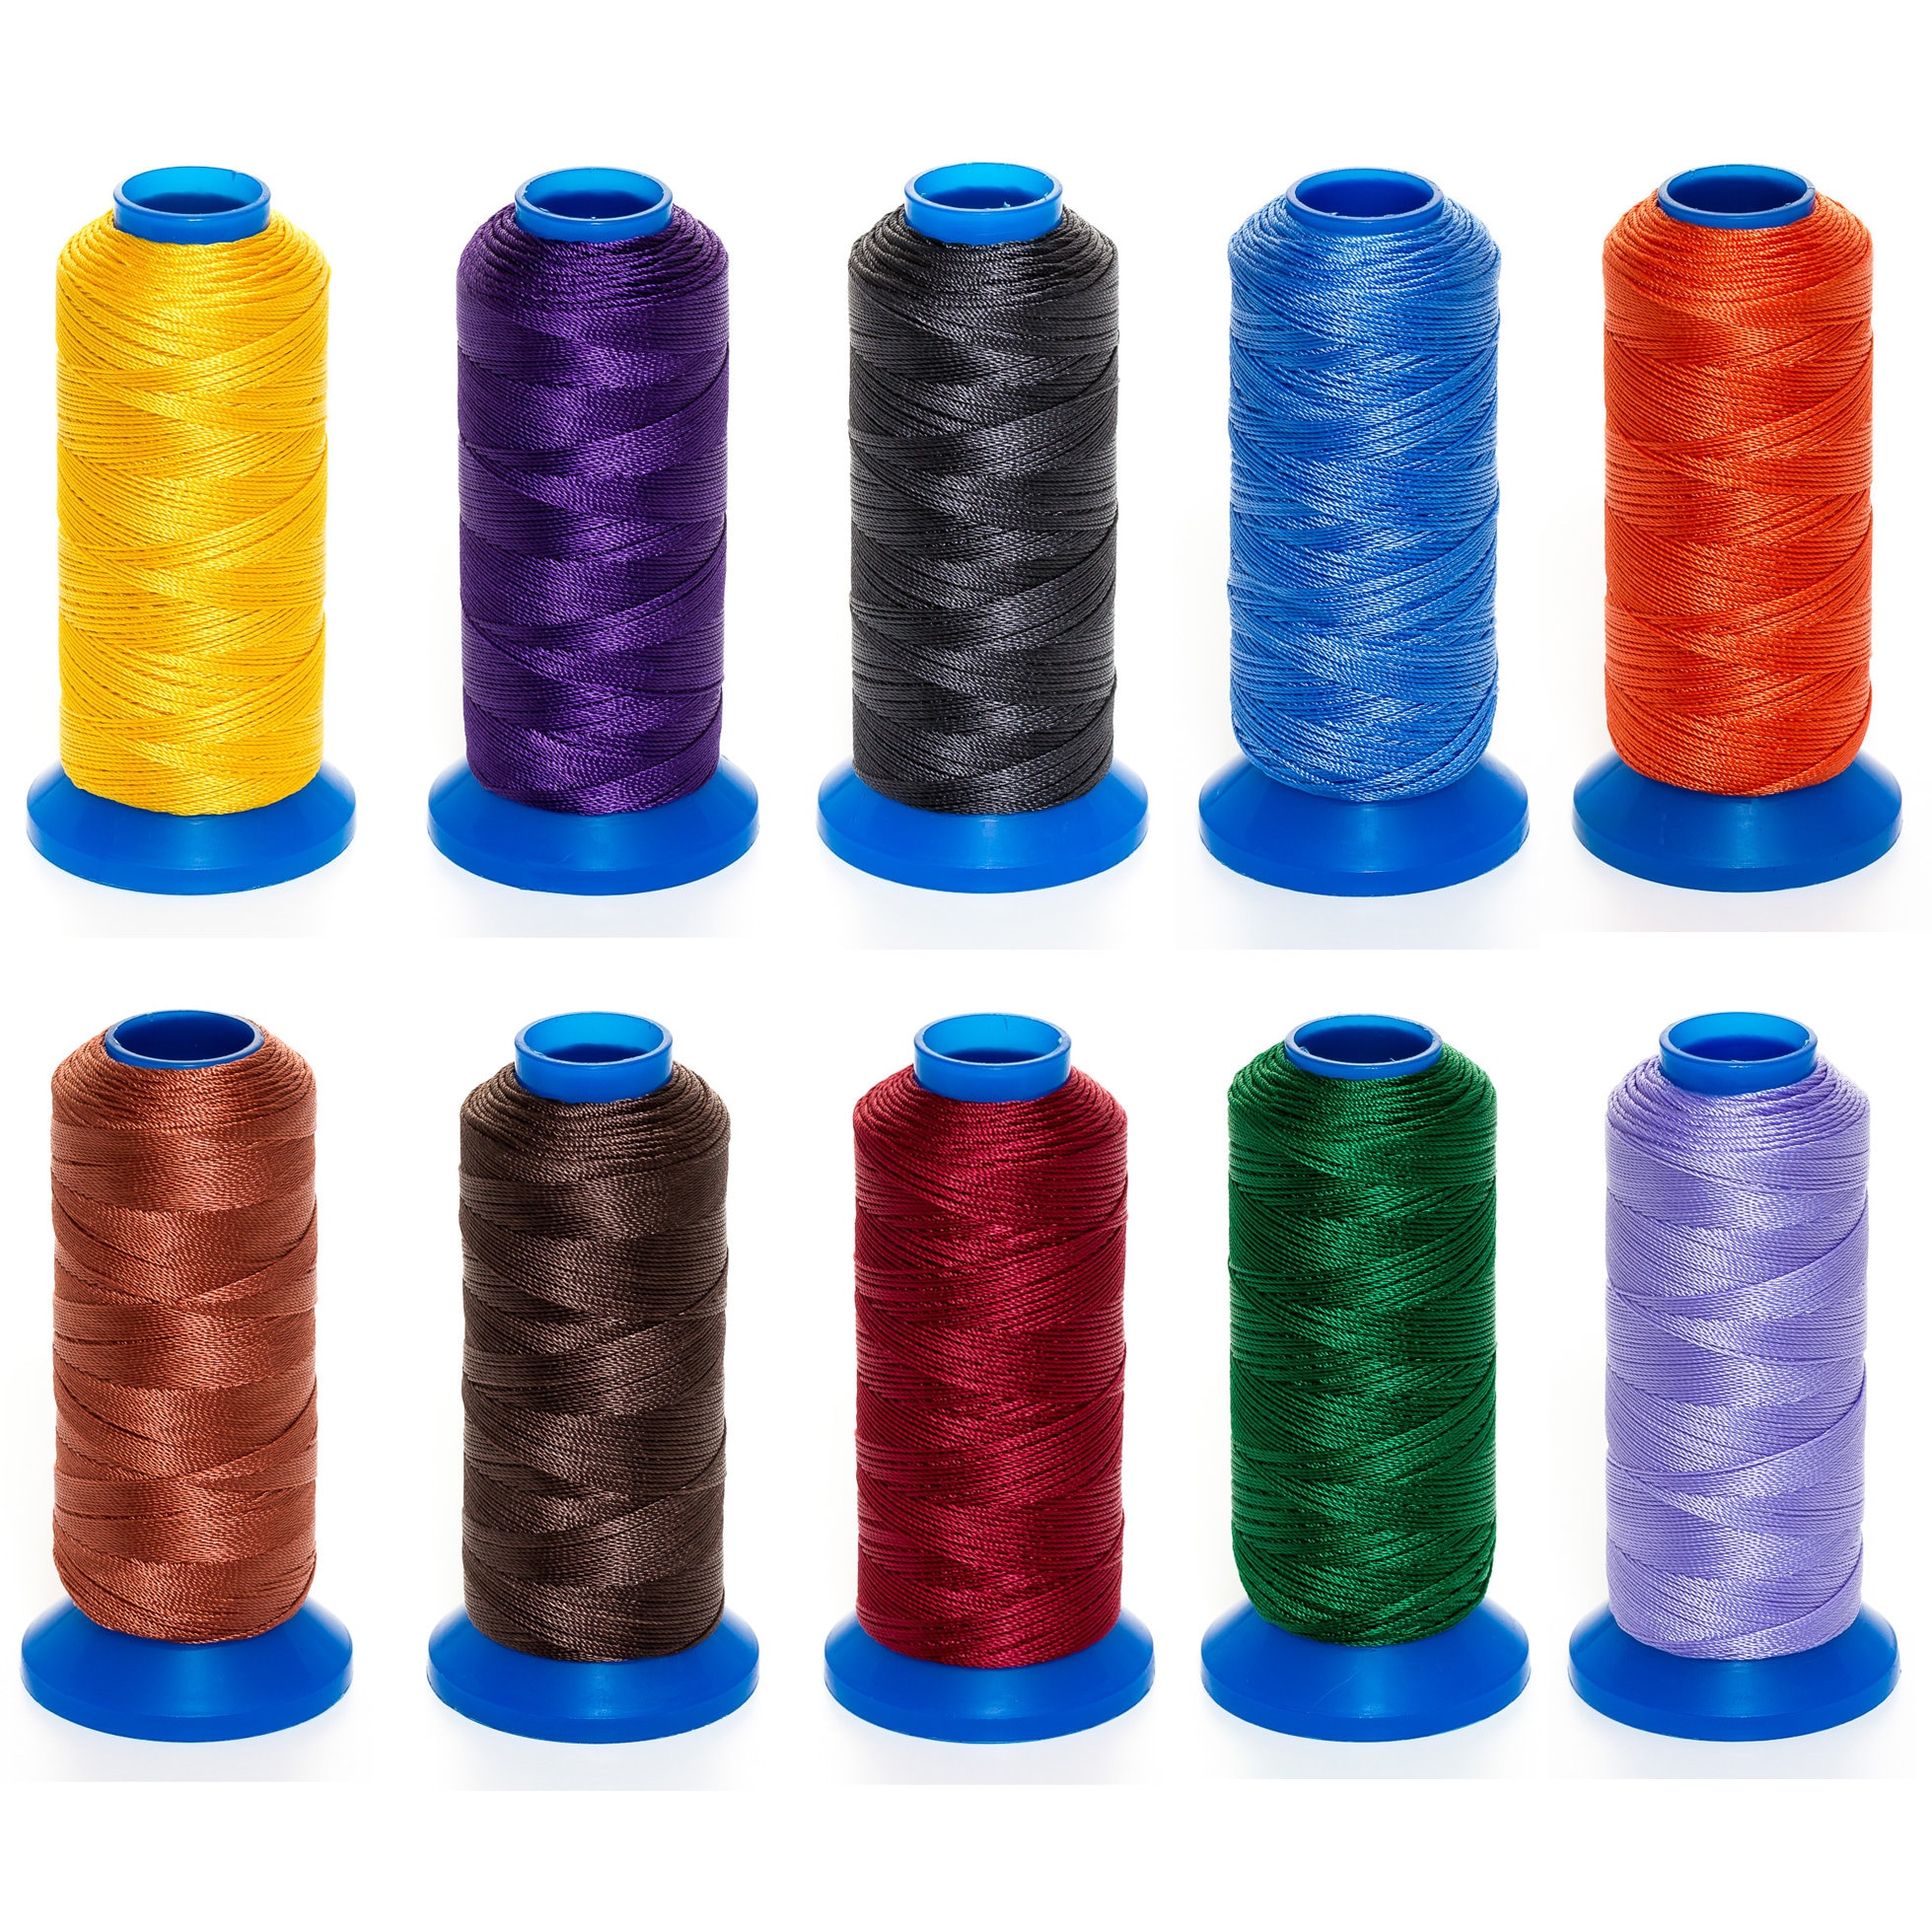 Griffin® Jewelry Nylon Thread Cord for Beads and Pearls Stringing Material  Available in 27 Brilliant Colors and 10 Different Diameters 